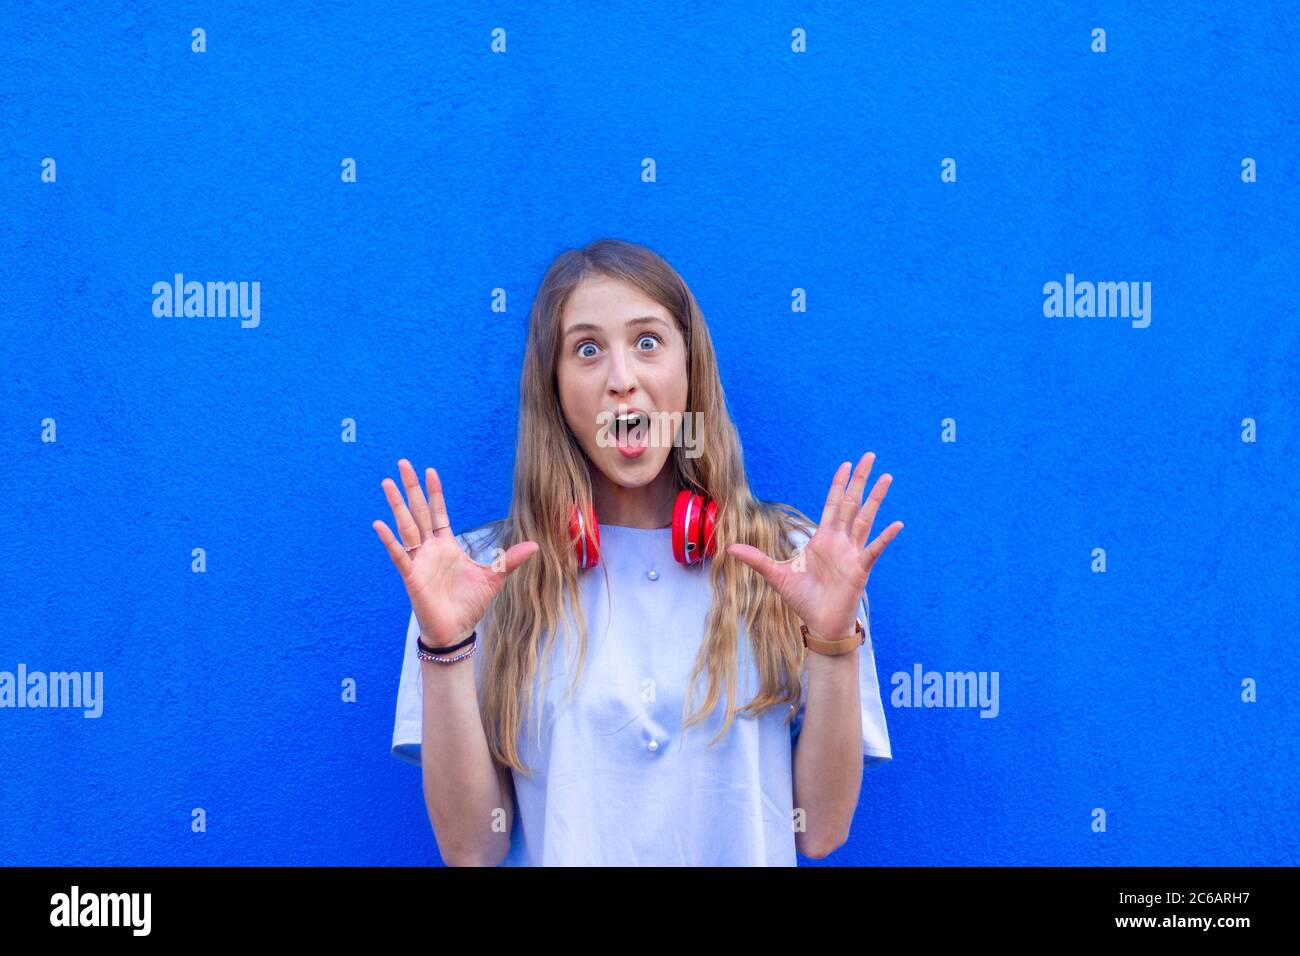 portrait of young girl with surprised expression and colored background - surprise expression of young woman with blue background Stock Photo